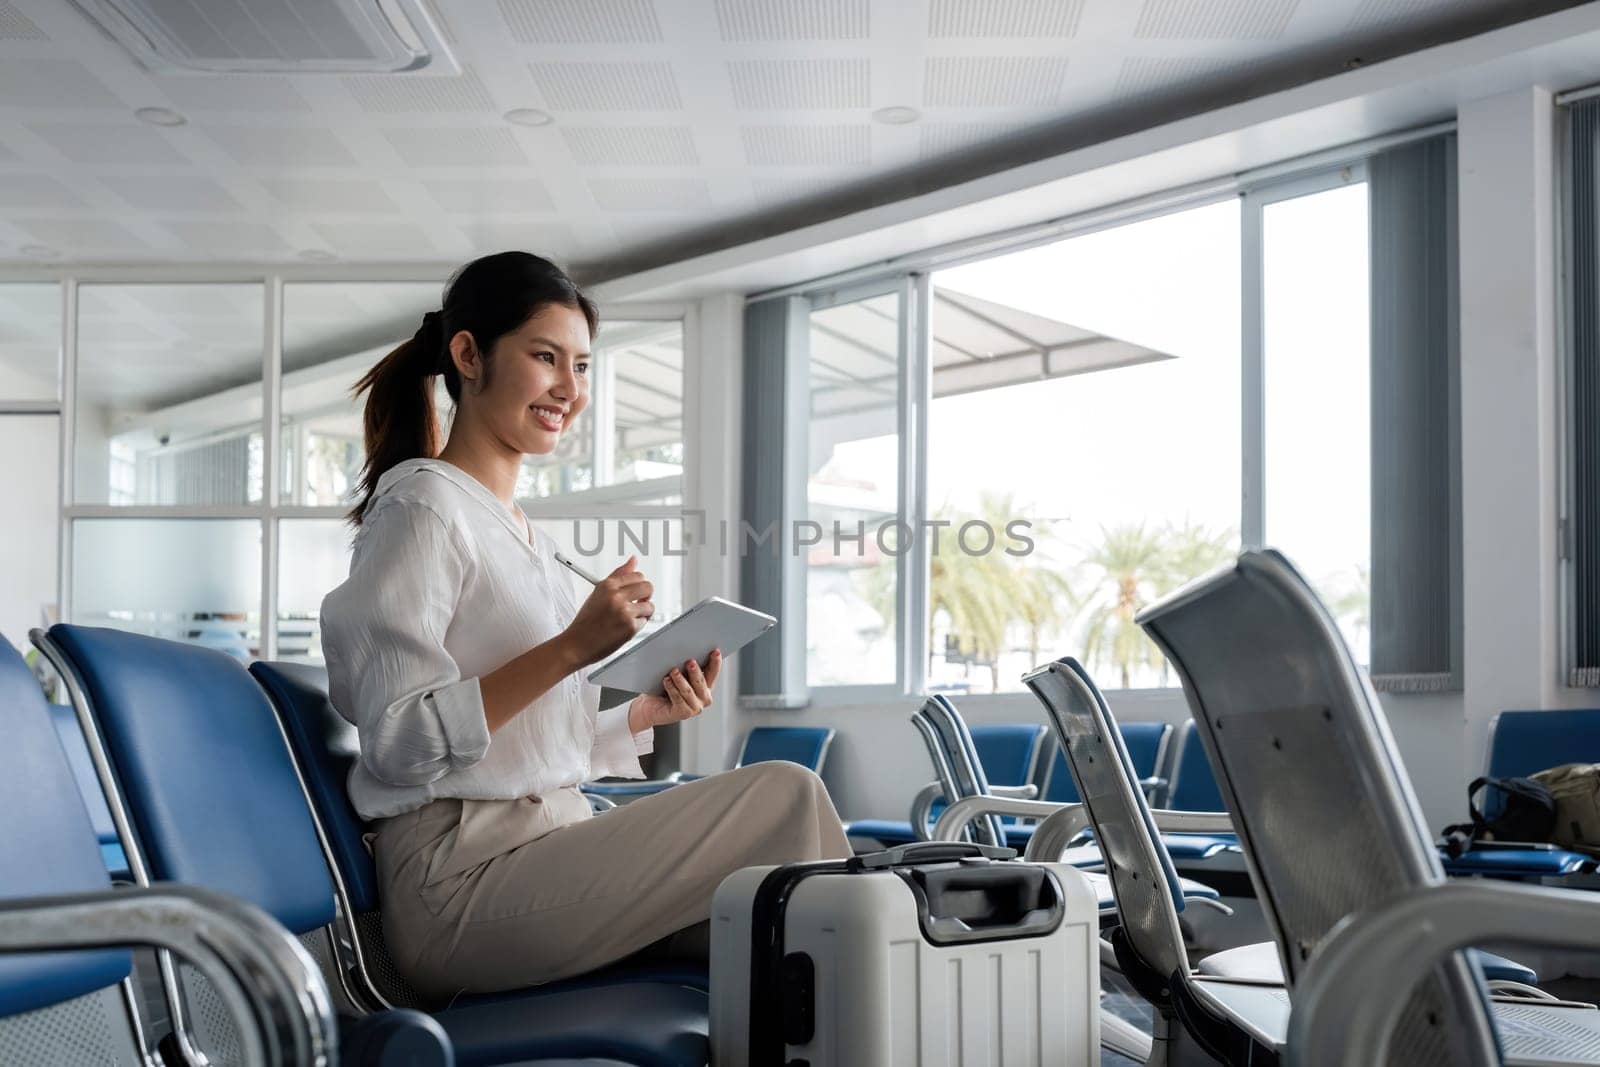 Young woman waiting at airport with luggage and tablet. Concept of travel and technology.